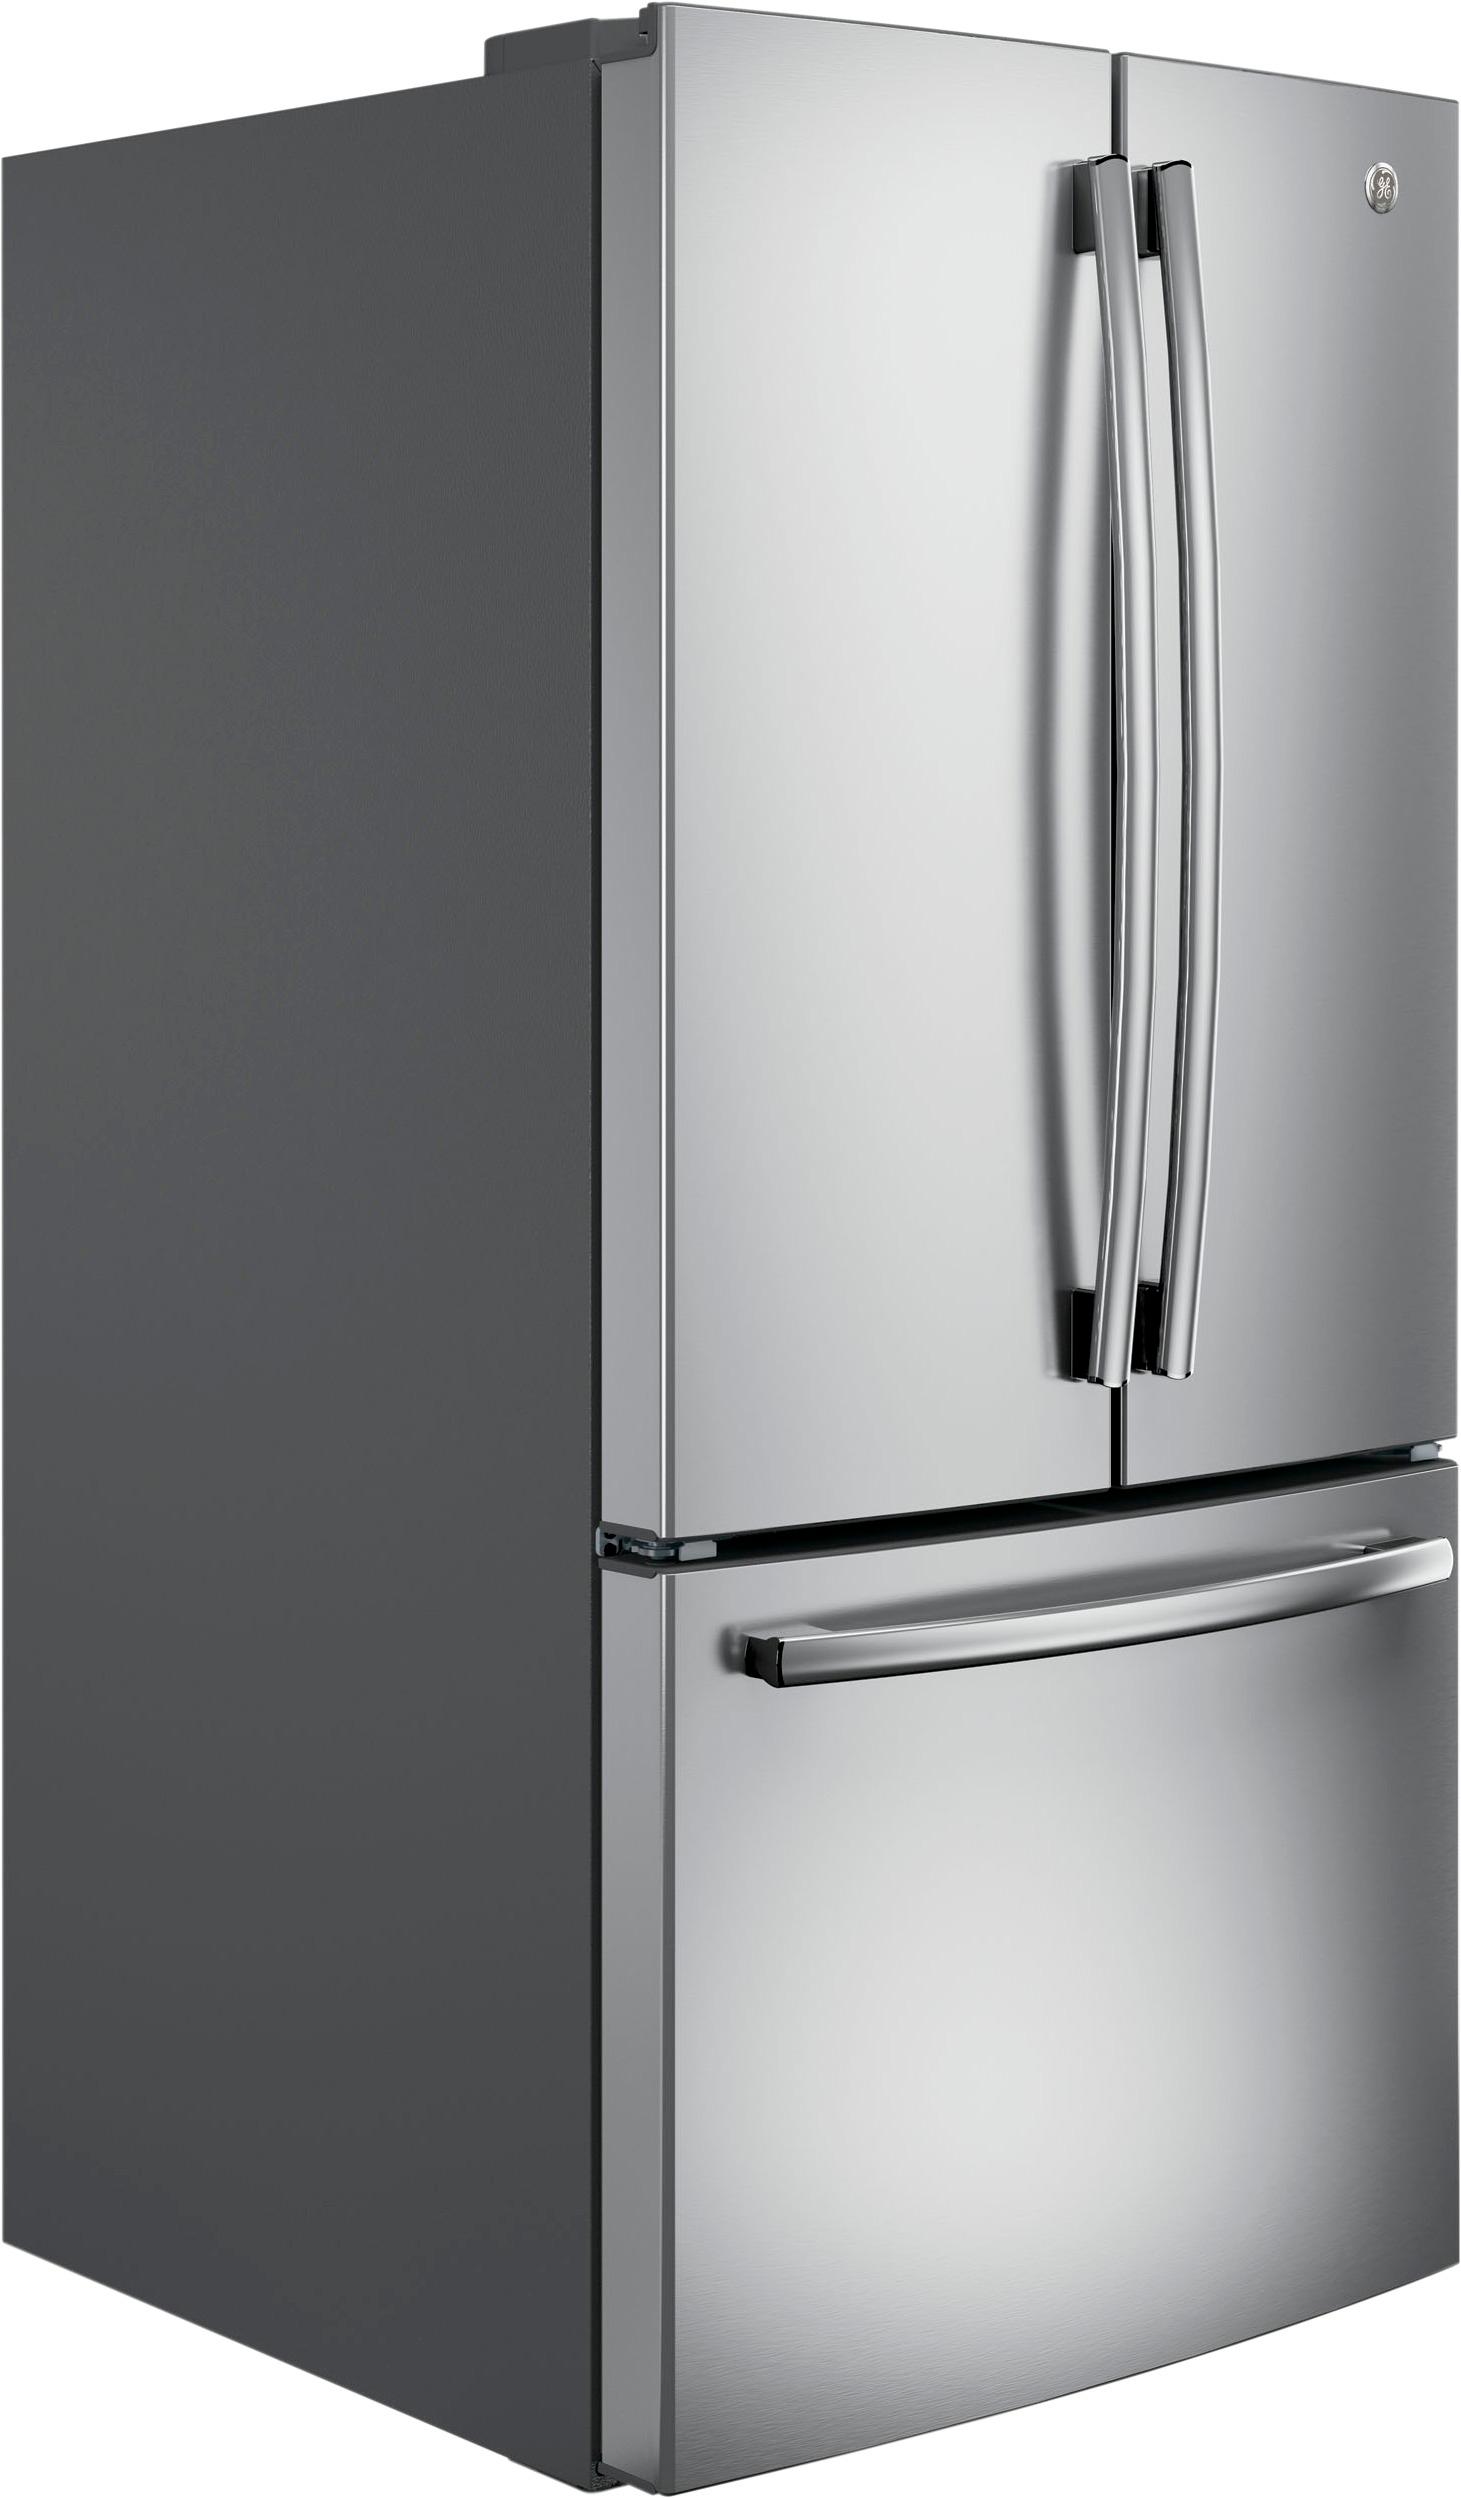 Angle View: GE - Profile Series 22.1 Cu. Ft. Side-by-Side Counter-Depth Refrigerator - Stainless steel